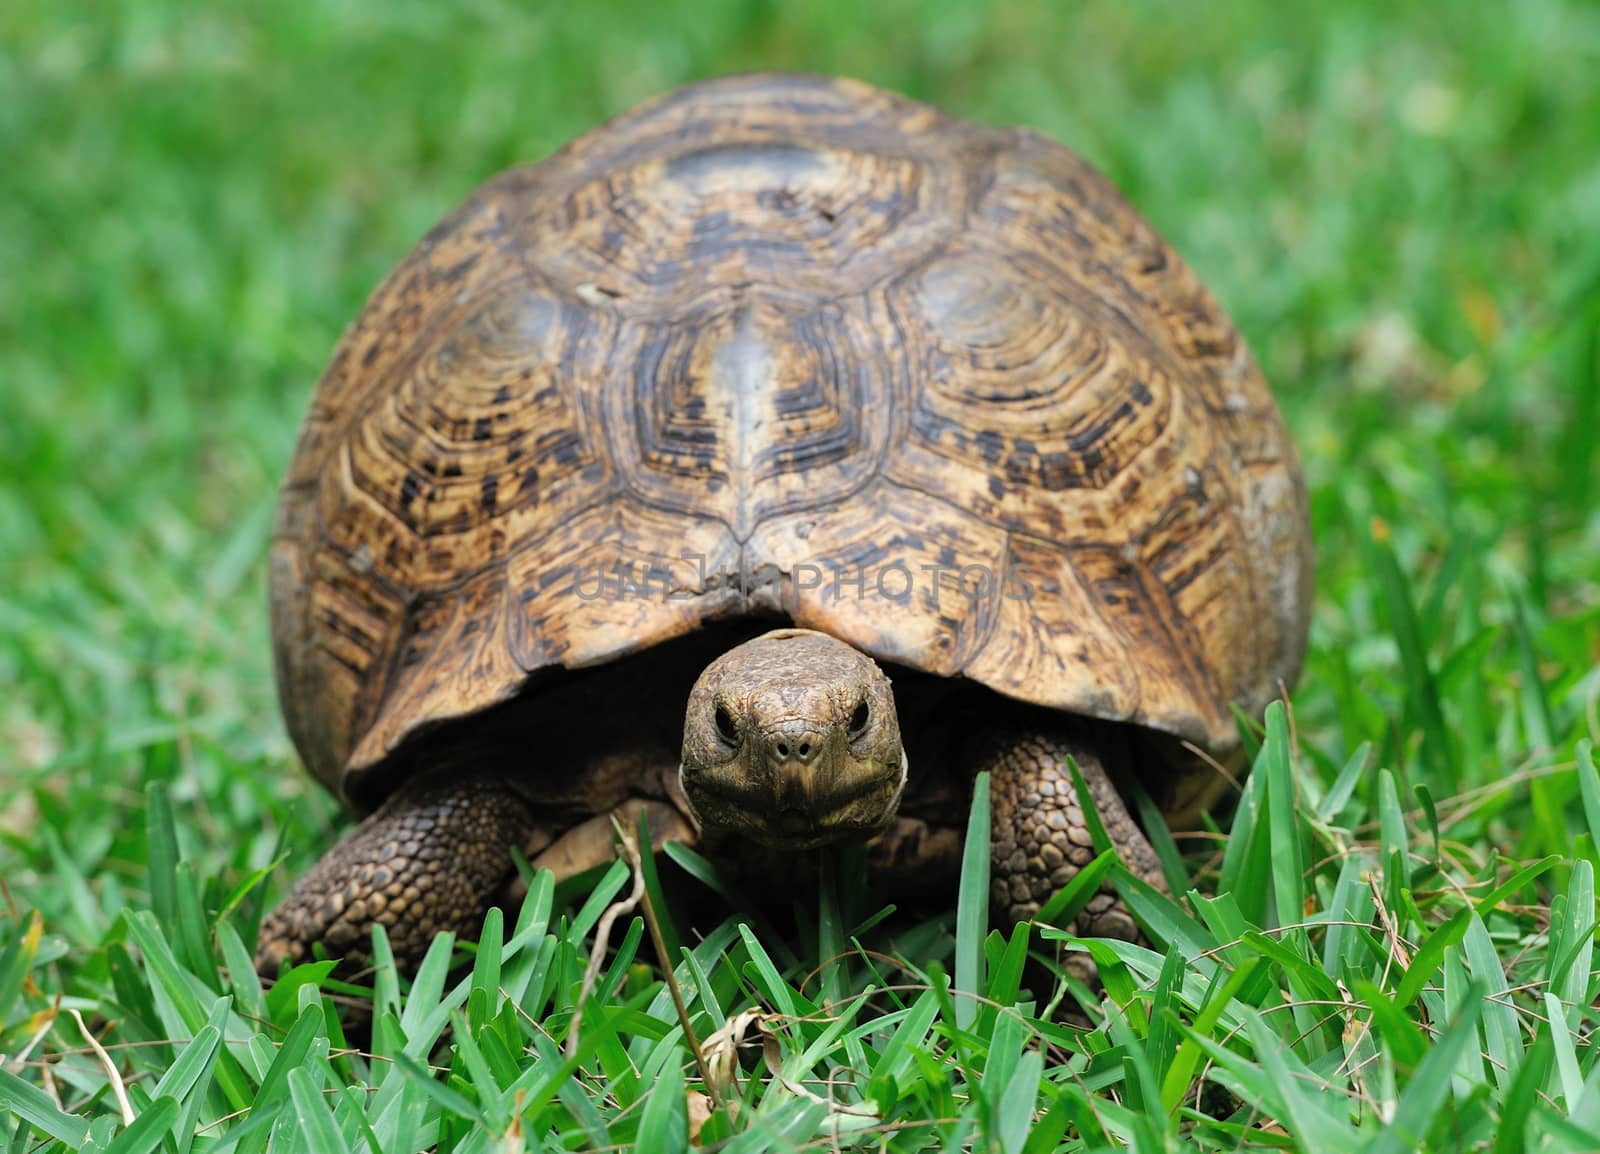 African Spurred Tortoise (Geochelone sulcata) in the grass